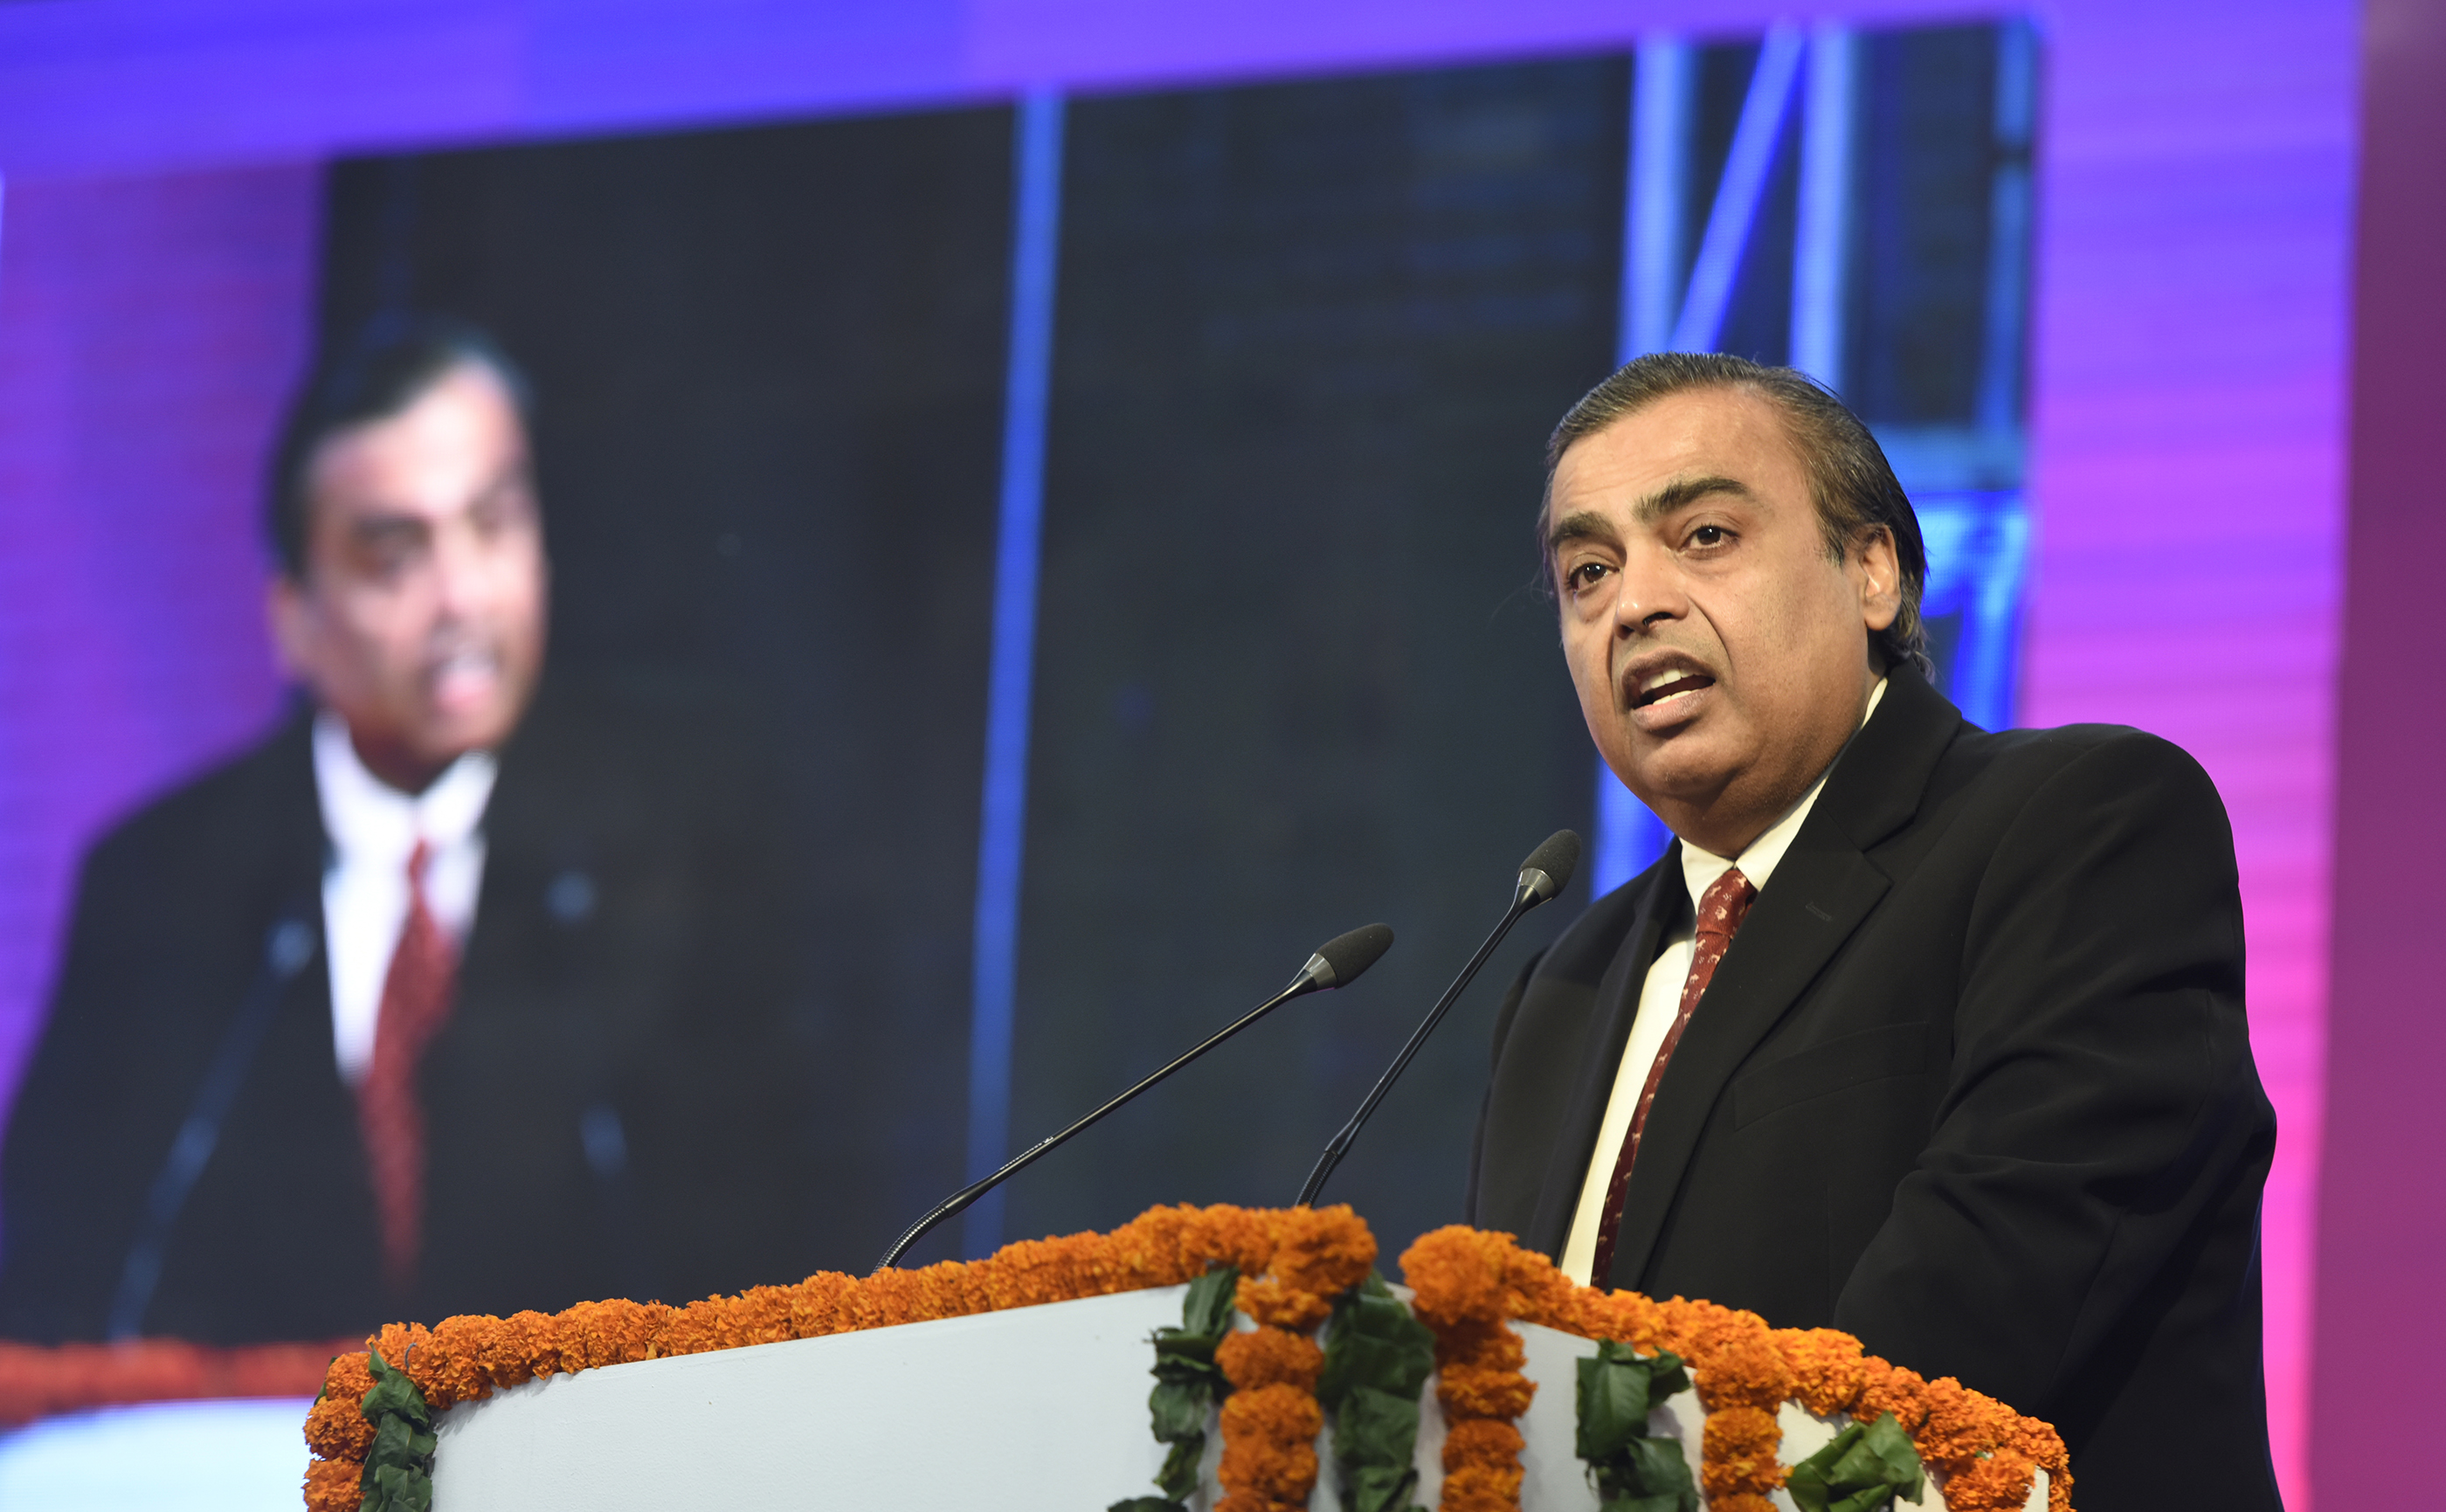 Meet Mukesh Ambani, the Billionaire Owner of the World's Most Expensive Home